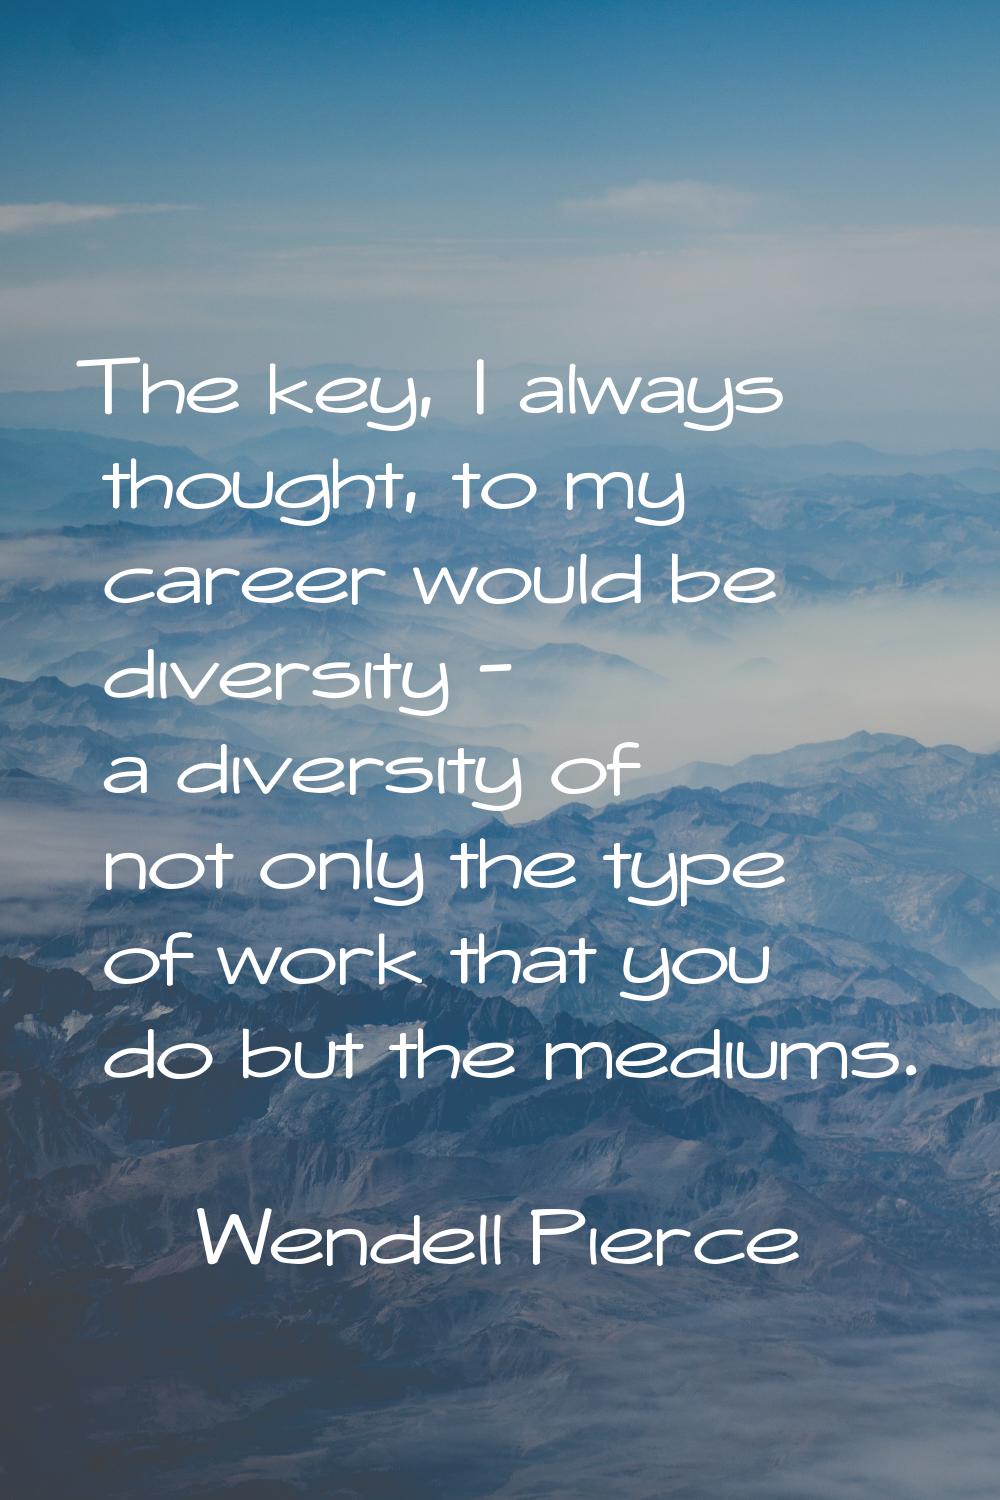 The key, I always thought, to my career would be diversity - a diversity of not only the type of wo